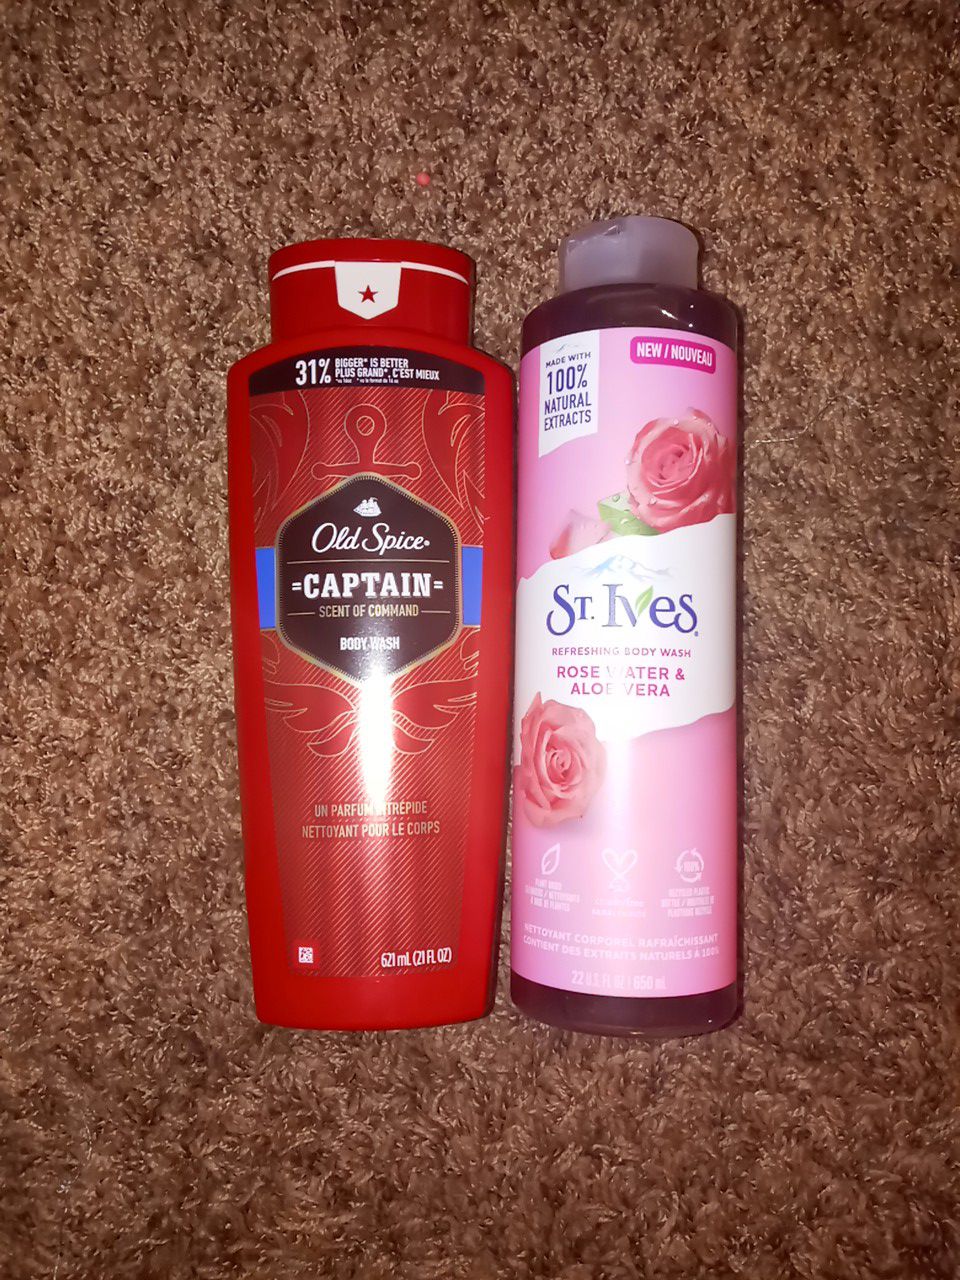 Old spice. St. Ives big size body wash 2×$7